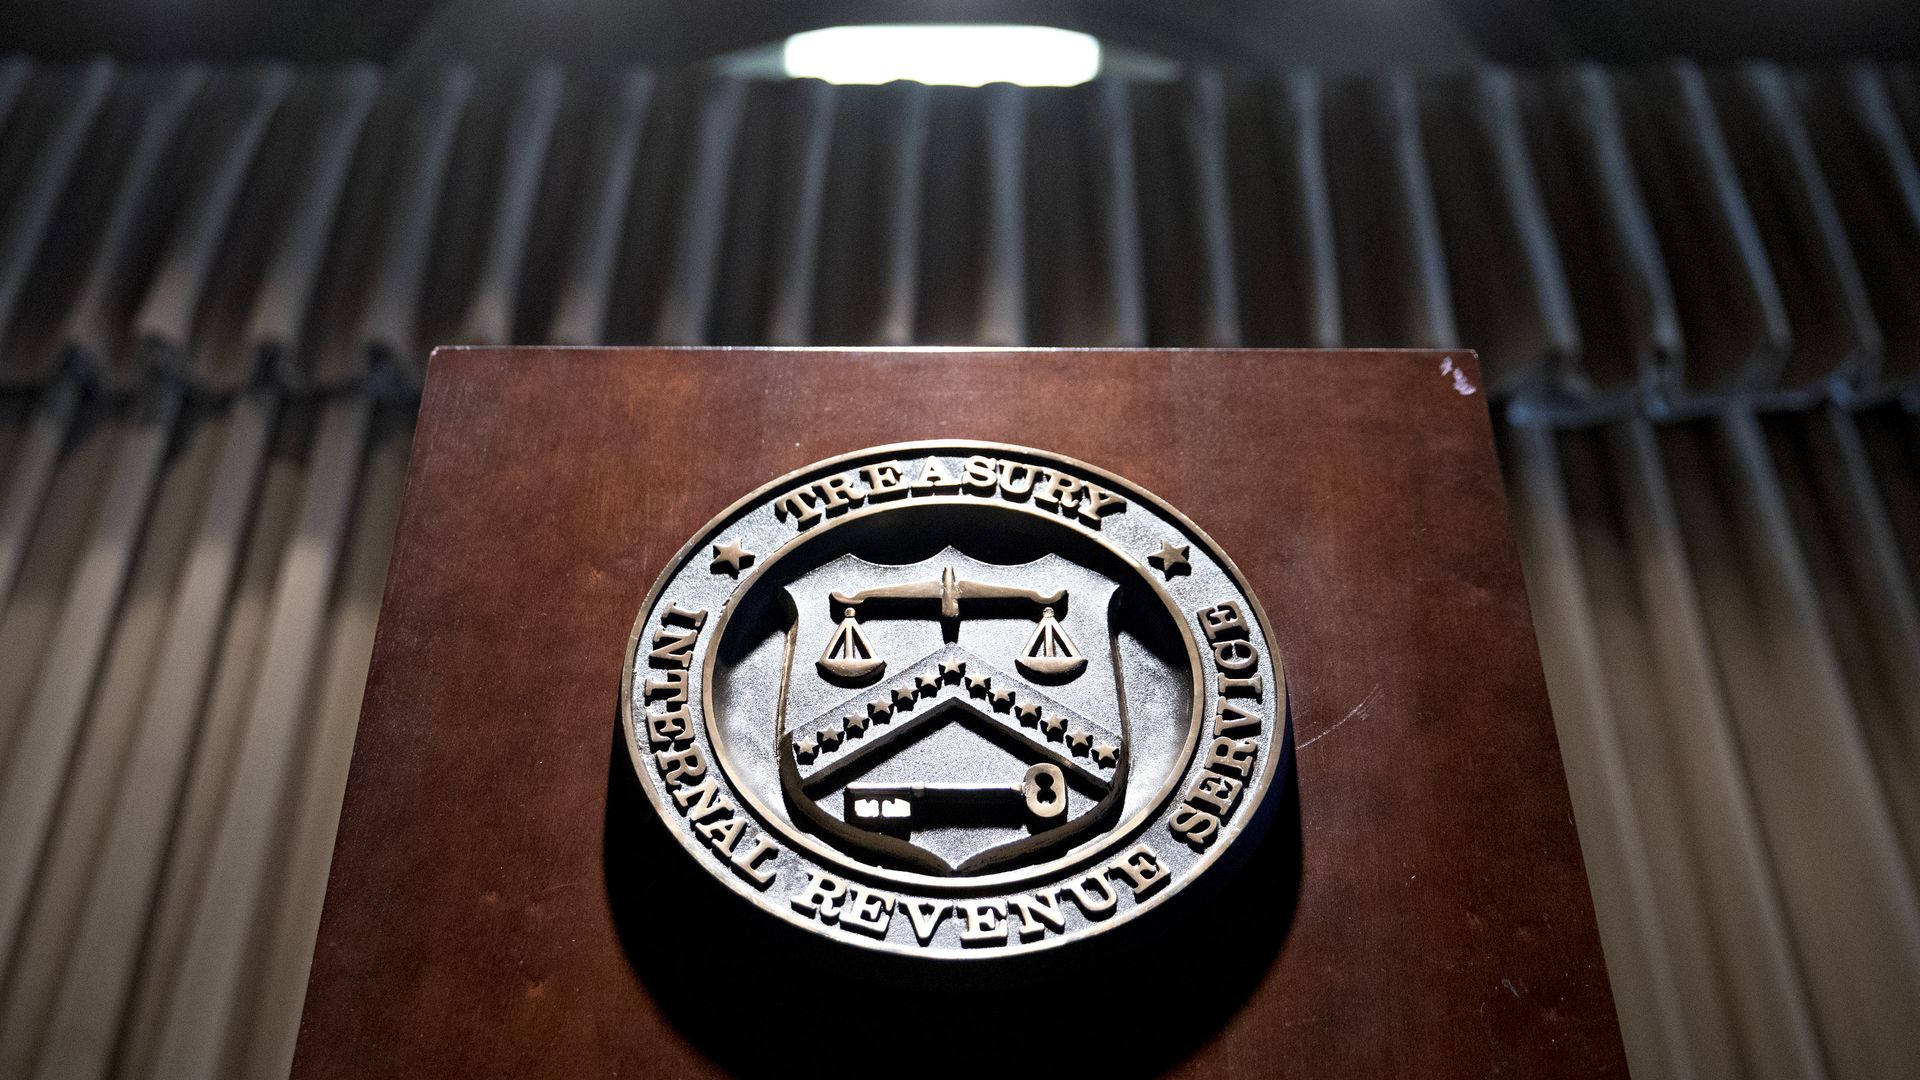 The seal of the Internal Revenue Service (IRS) hangs on a podium.